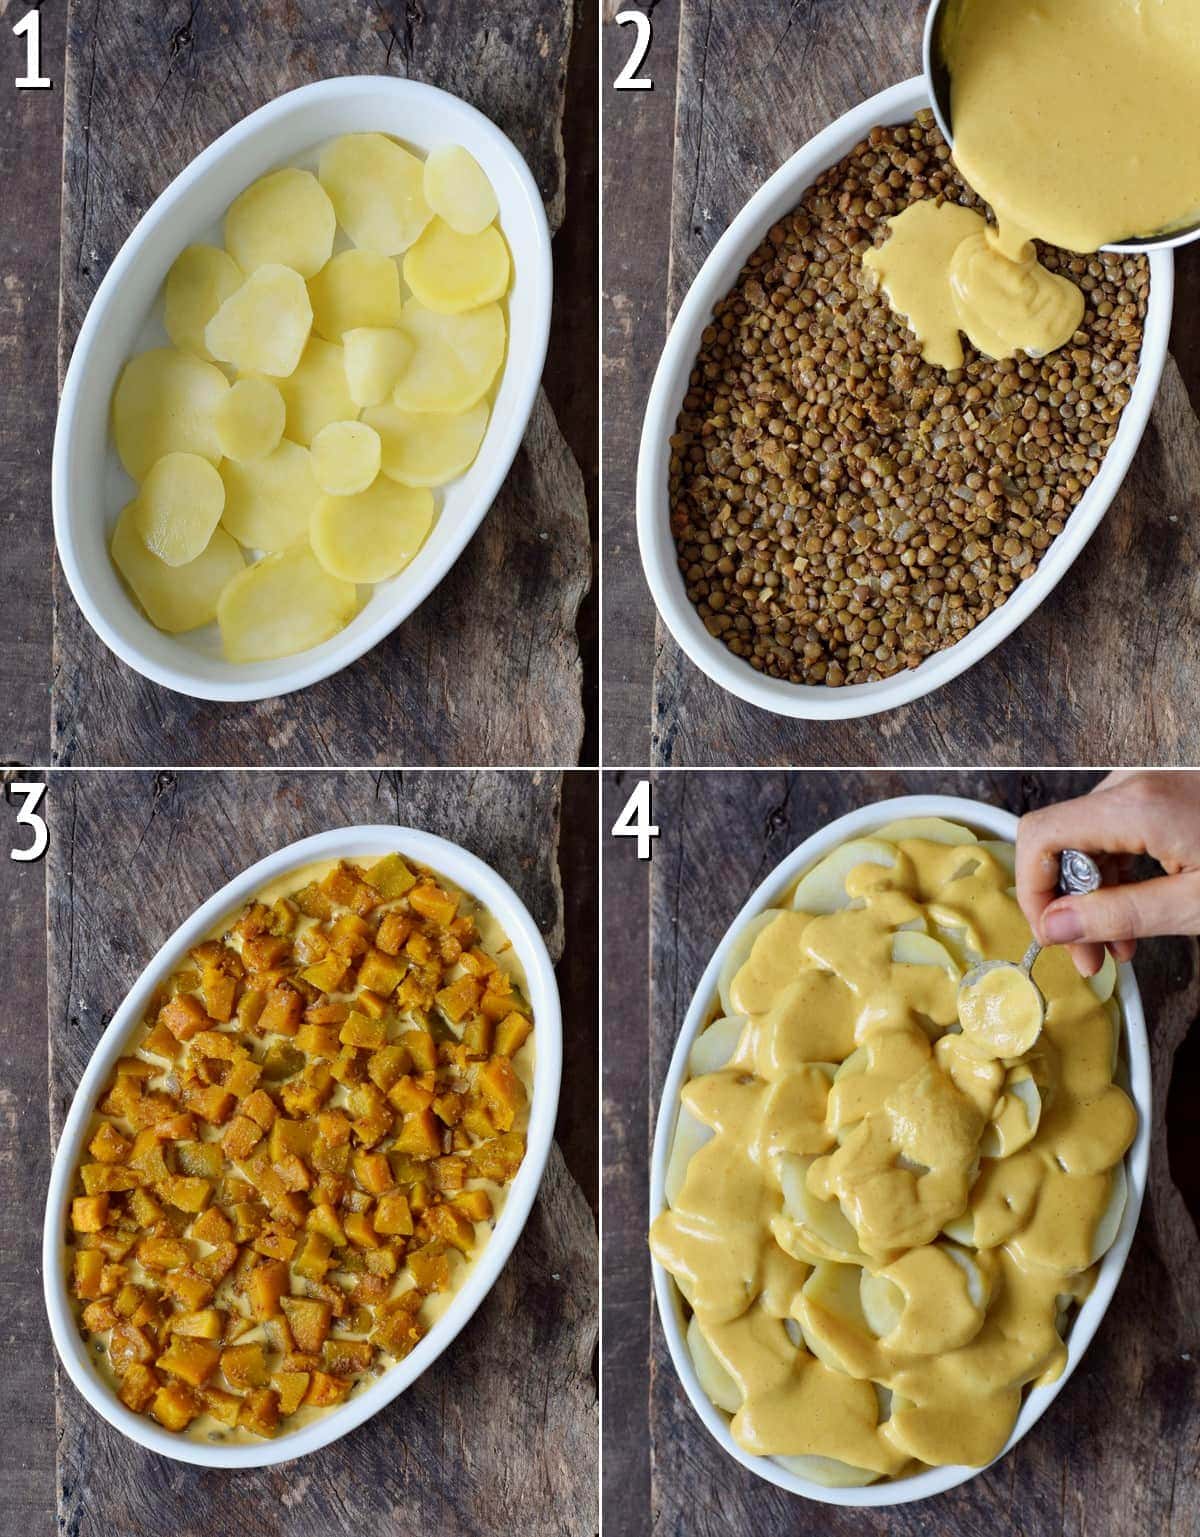 Assembling bake with pumpkin, lentils, and potatoes in baking dish